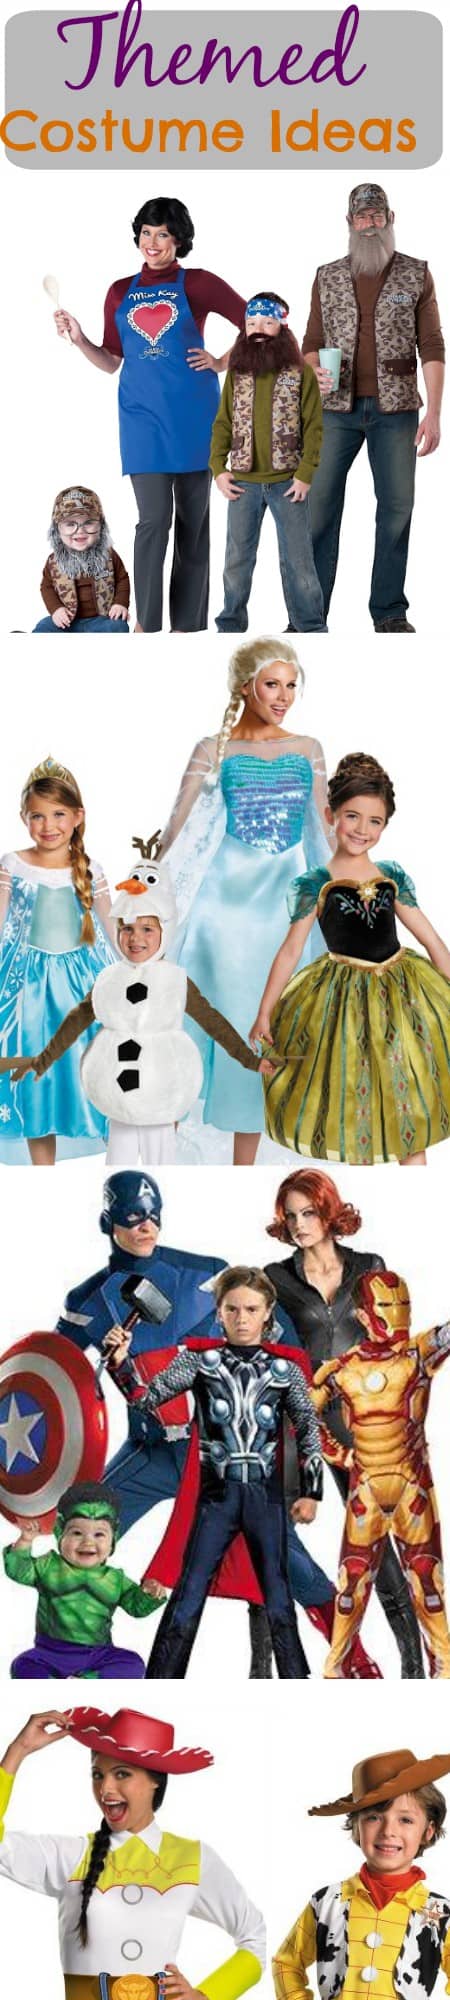 Our family likes to do themed Halloween costumes every year. Here are some halloween costume ideas for groups or family